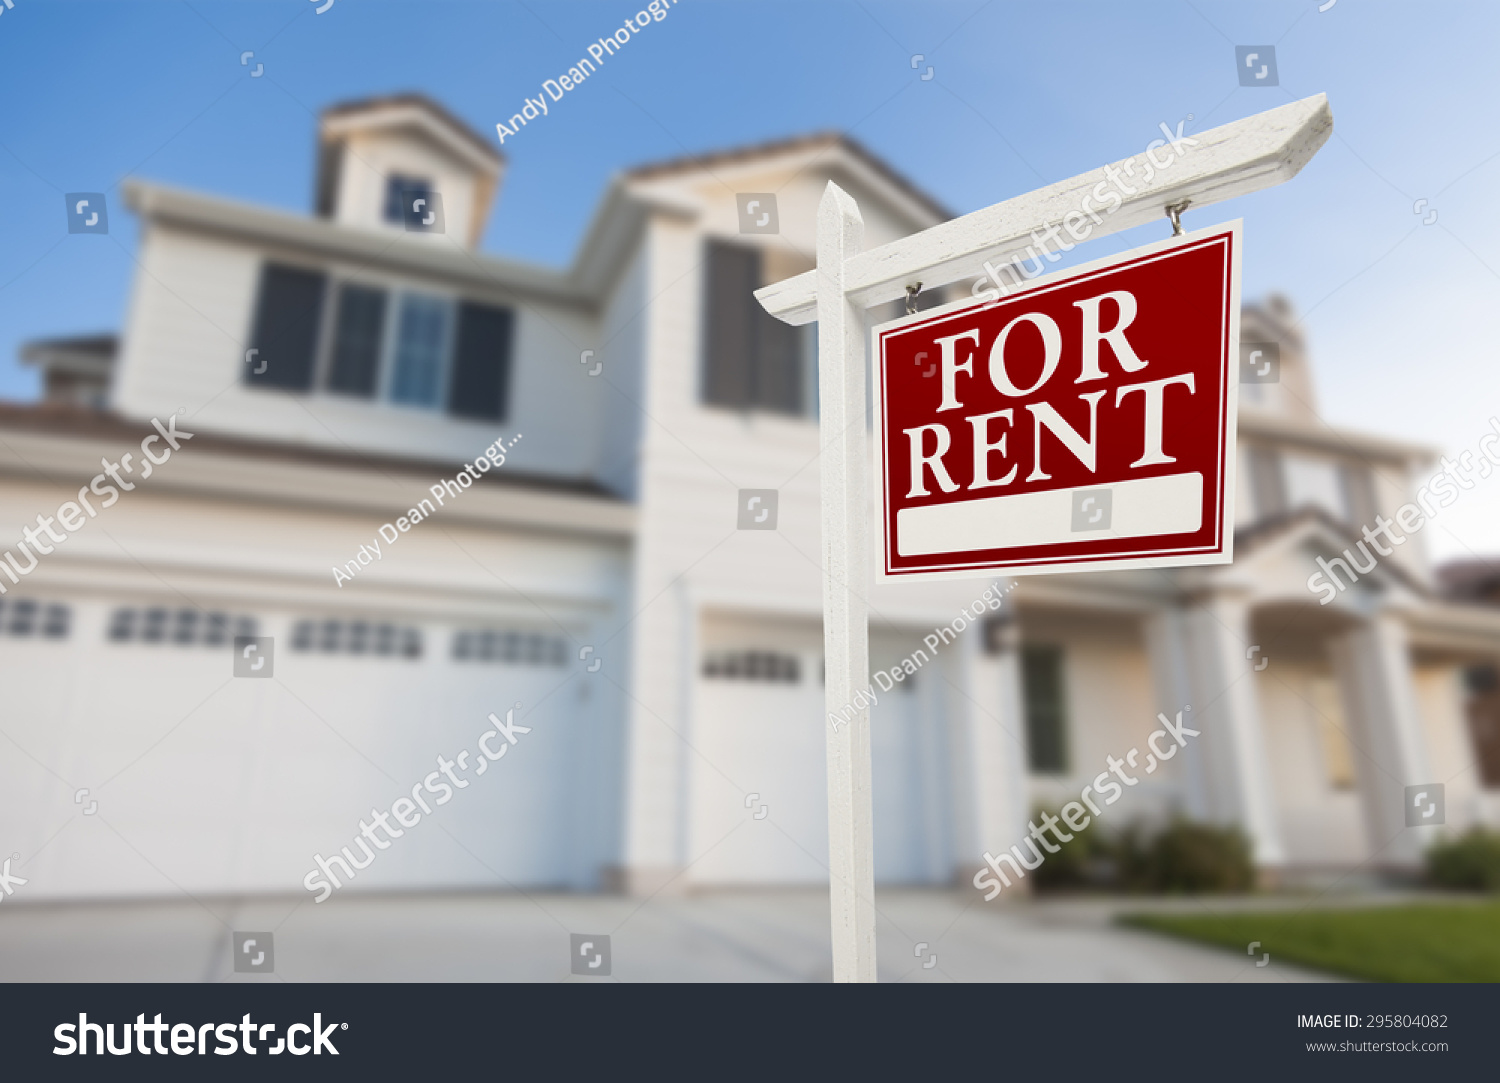 Red For Rent Real Estate Sign in Front of Beautiful House. #295804082